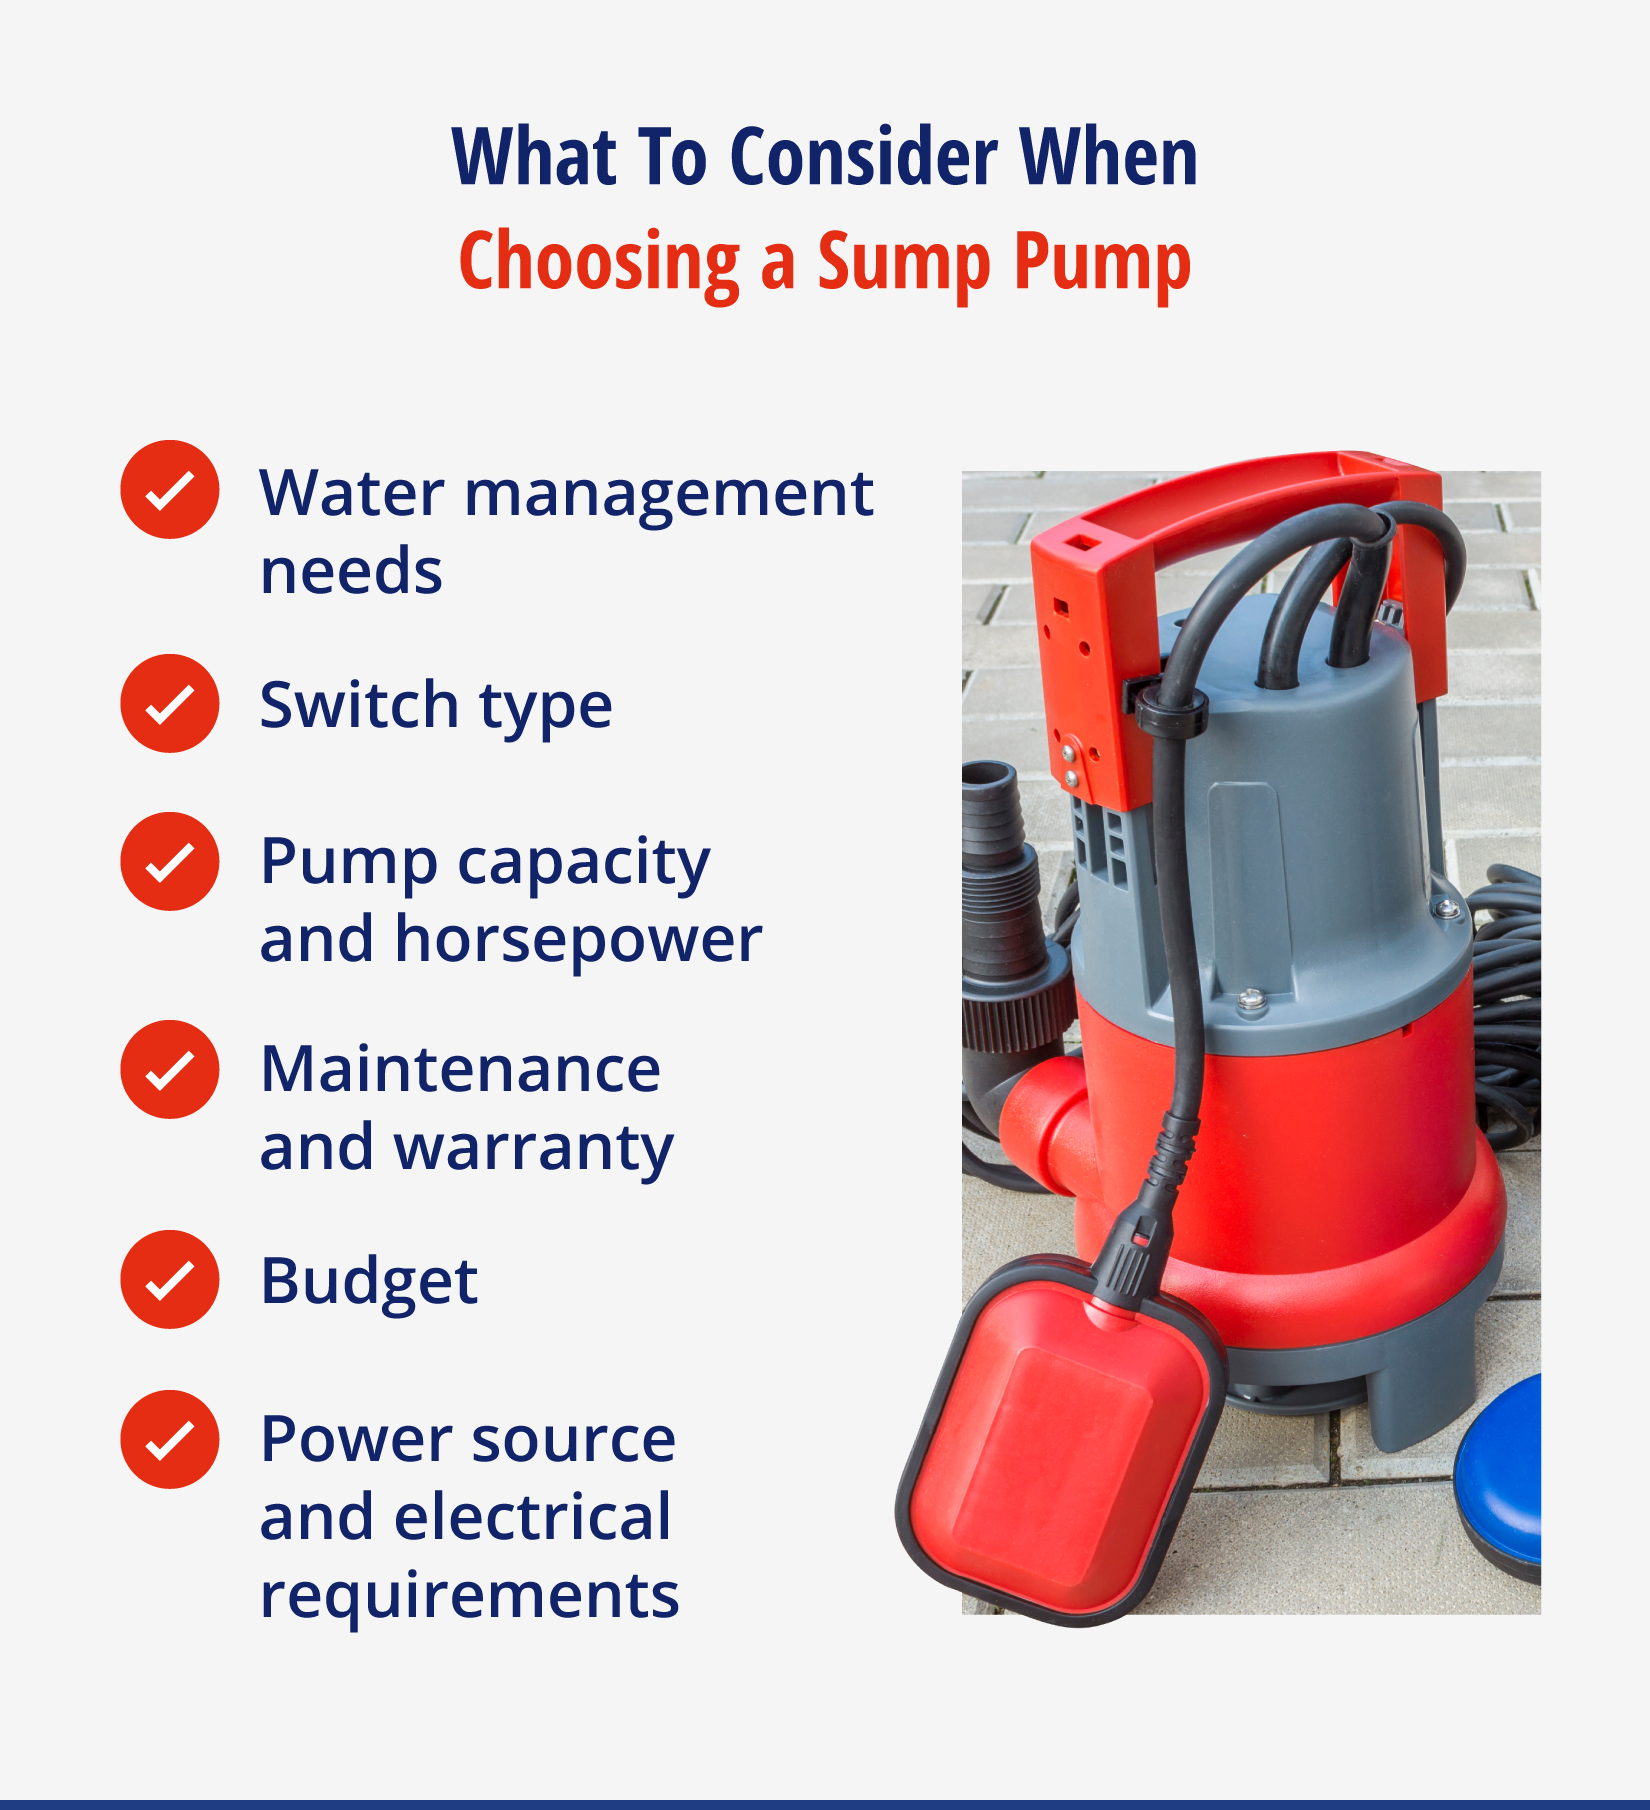 Graphic listing things to consider when choosing a sump pump.